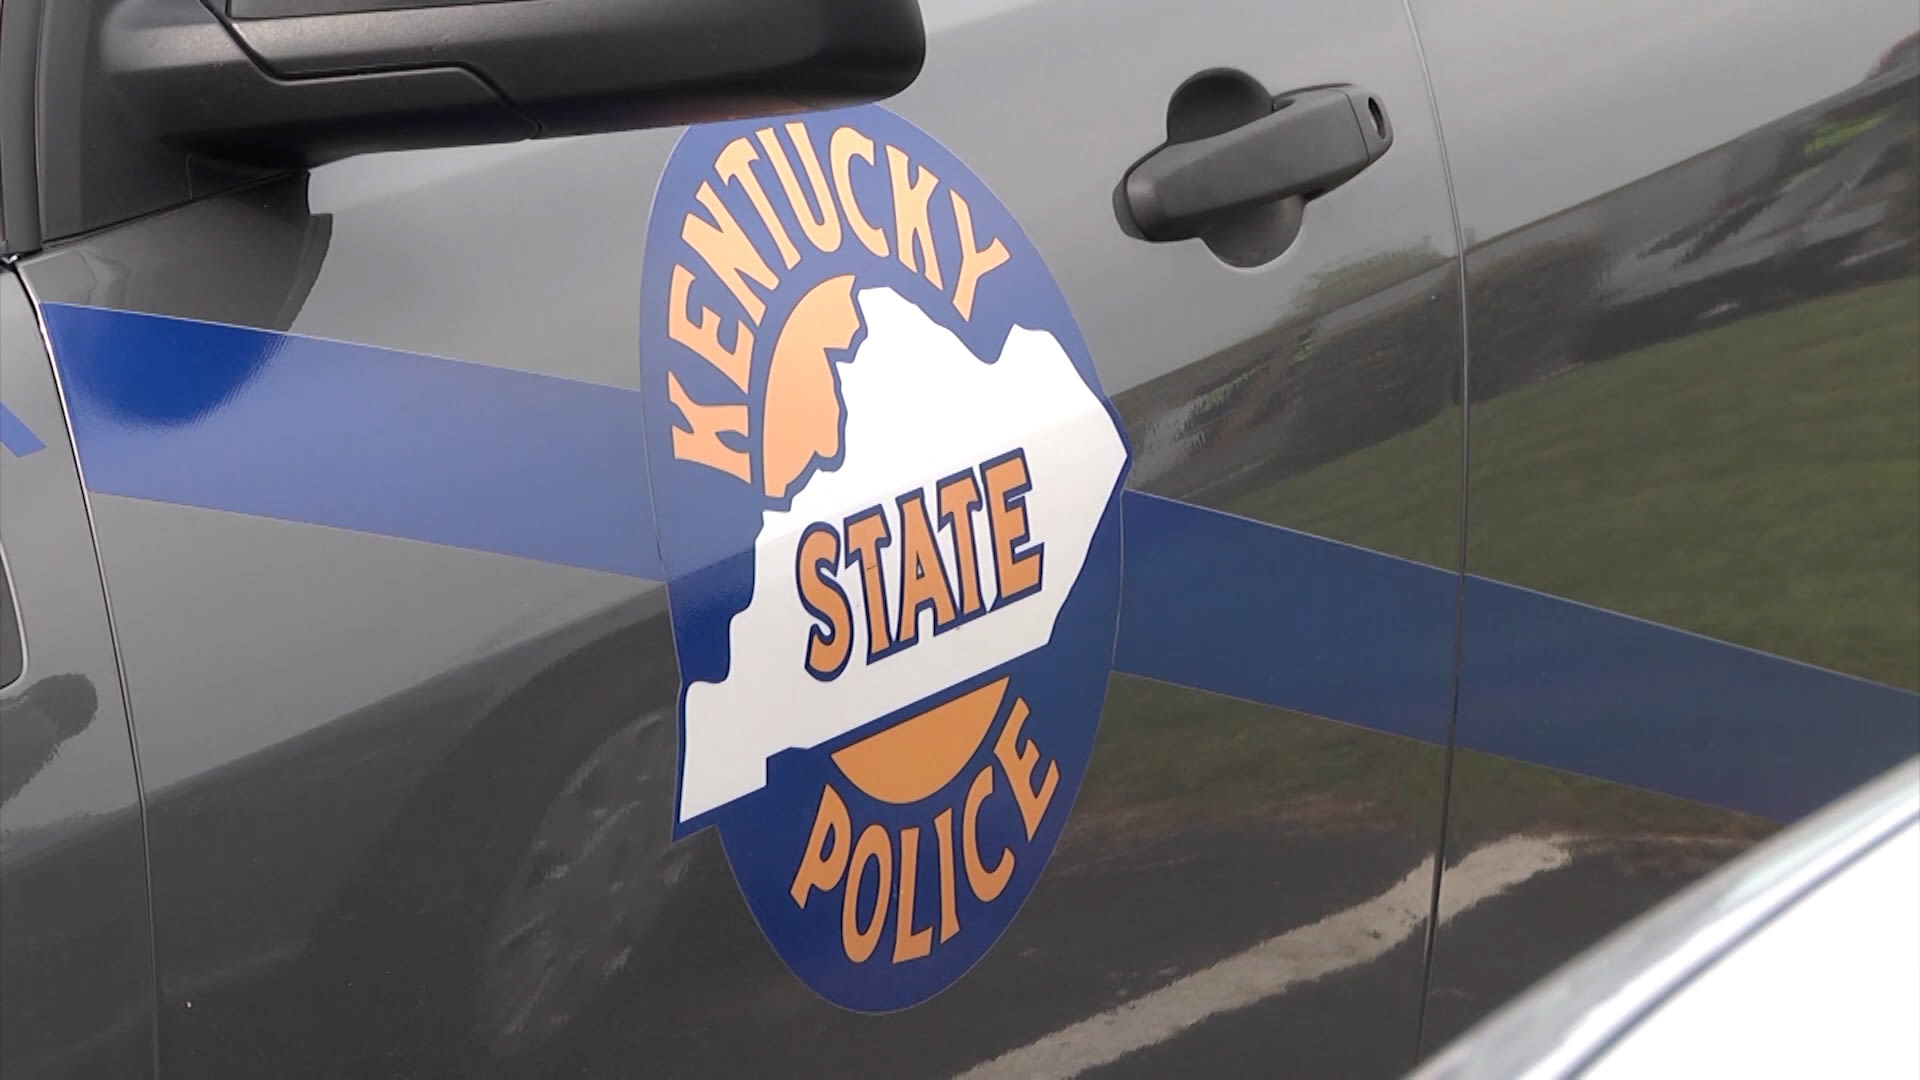 10-year-old dead after moped collision in Whitley County - WNKY News 40 Television